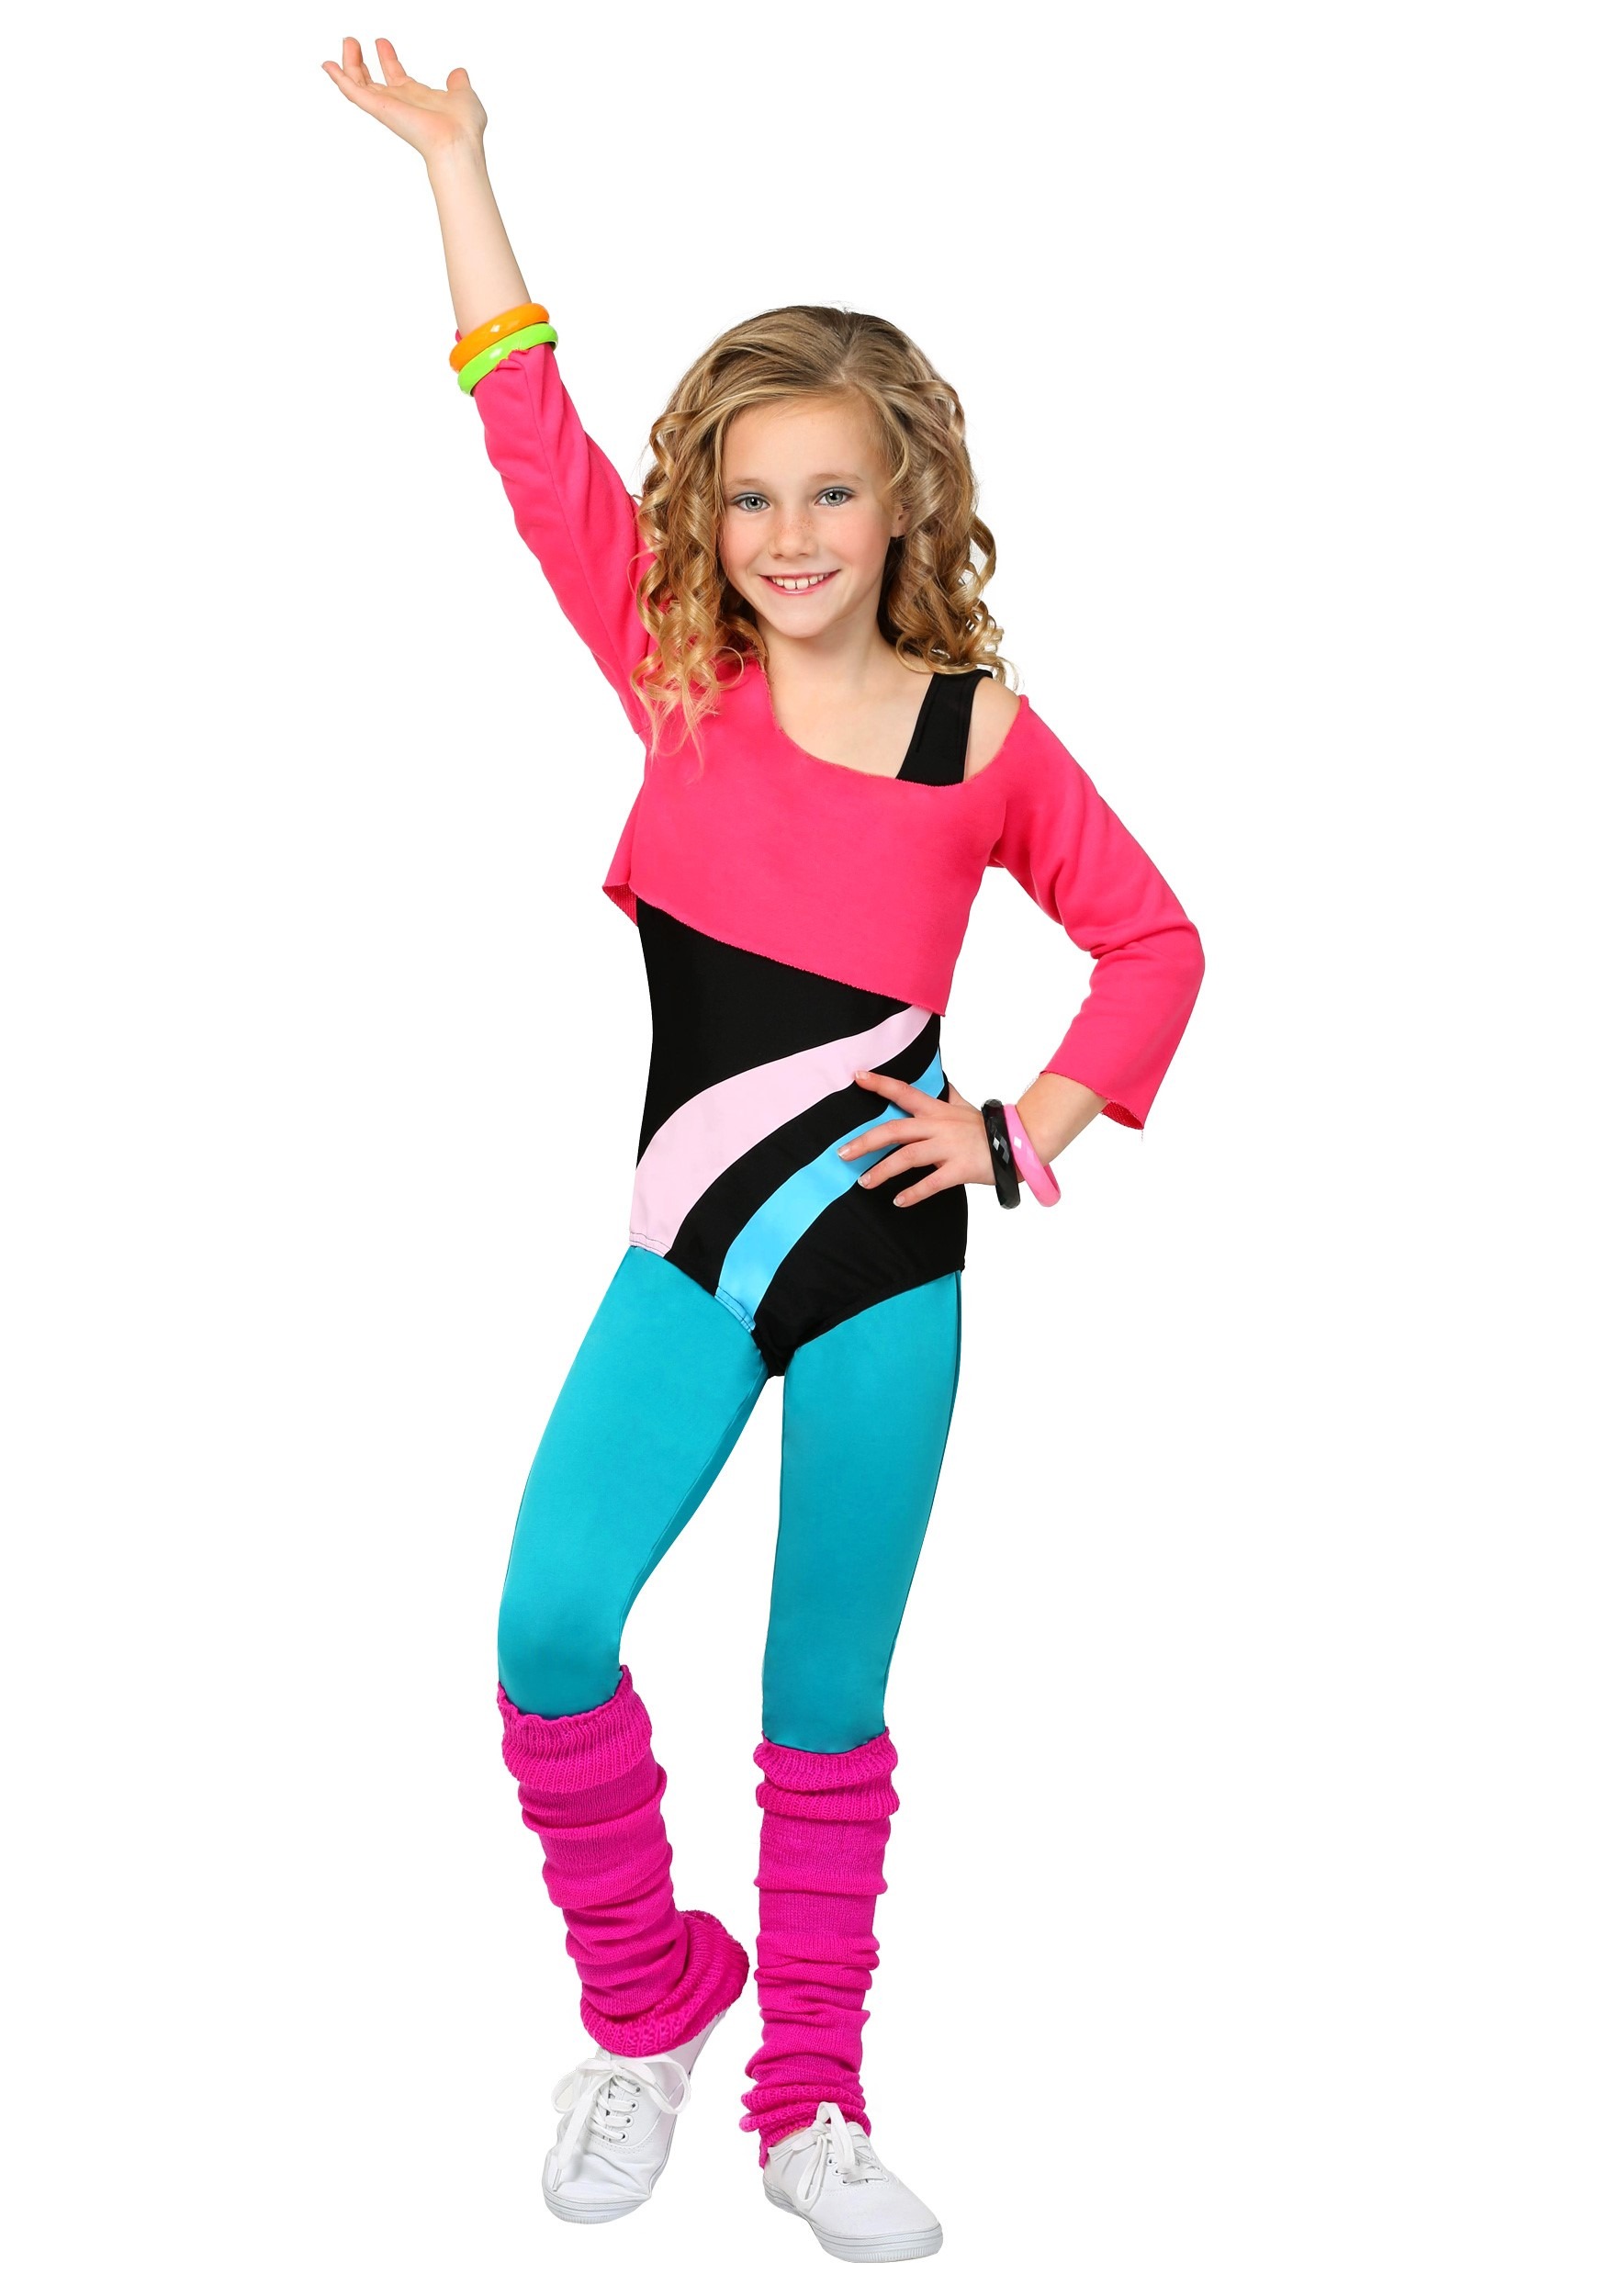 Photos - Fancy Dress FUN Costumes 80's Workout Costume for Girls | Kid's 80's Costumes Black